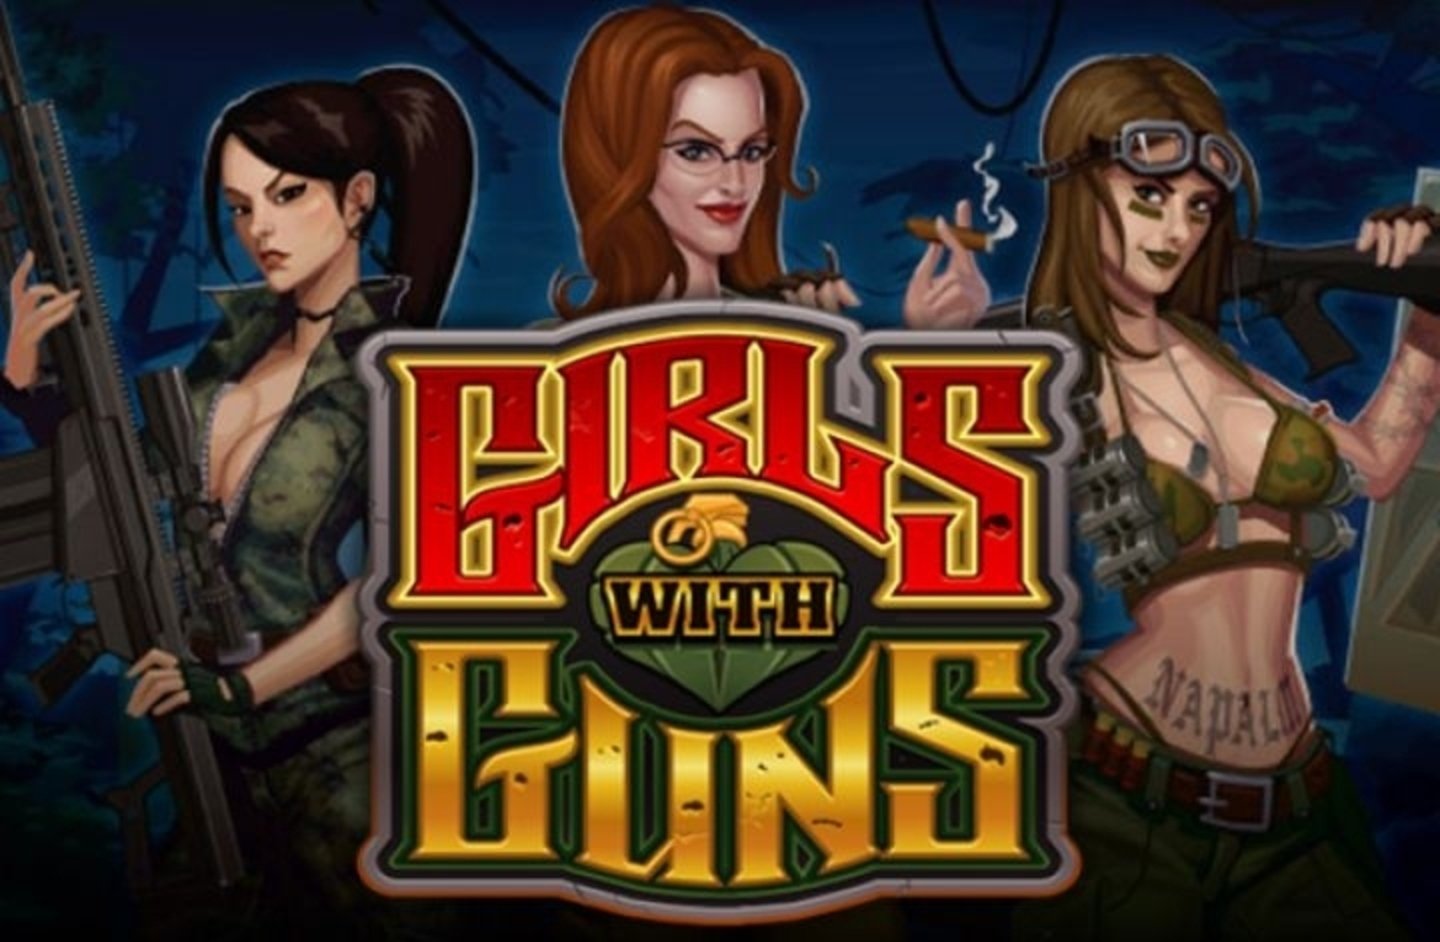 The Girls With Guns Online Slot Demo Game by Microgaming